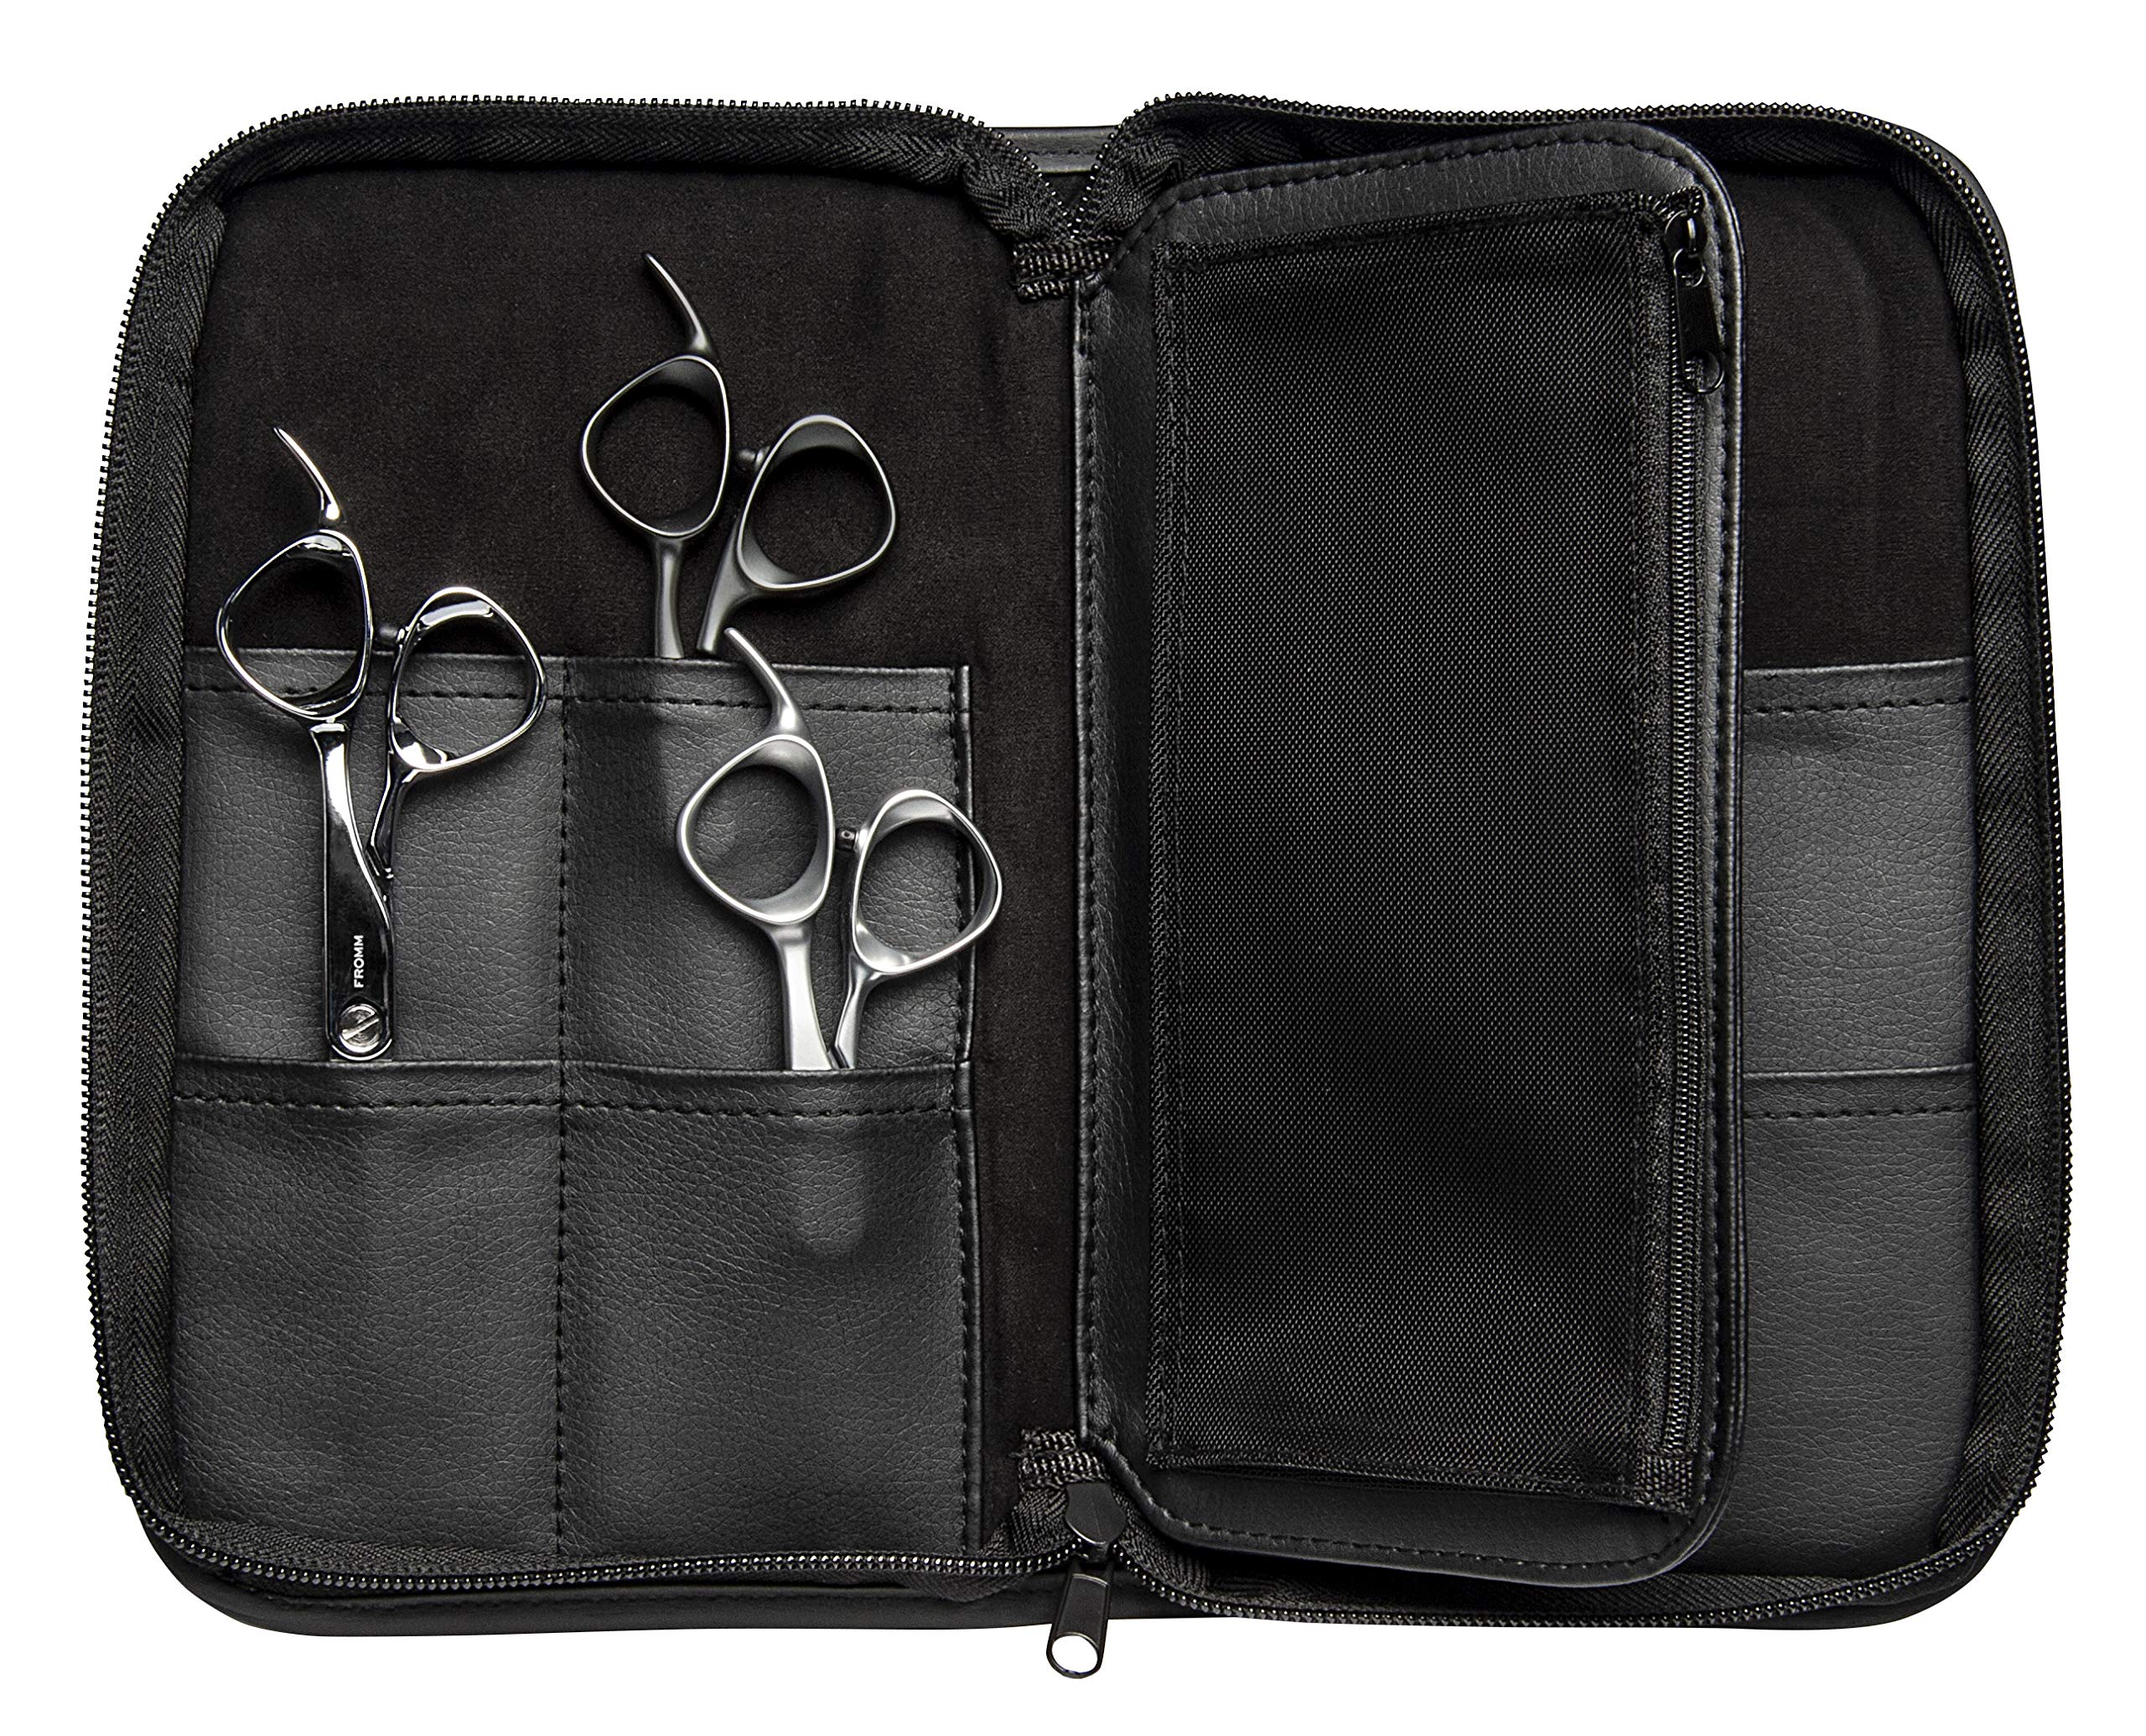 Fromm 8-Piece Zip Shear and Tool Case for Stylists and Barbers, Black, F1050